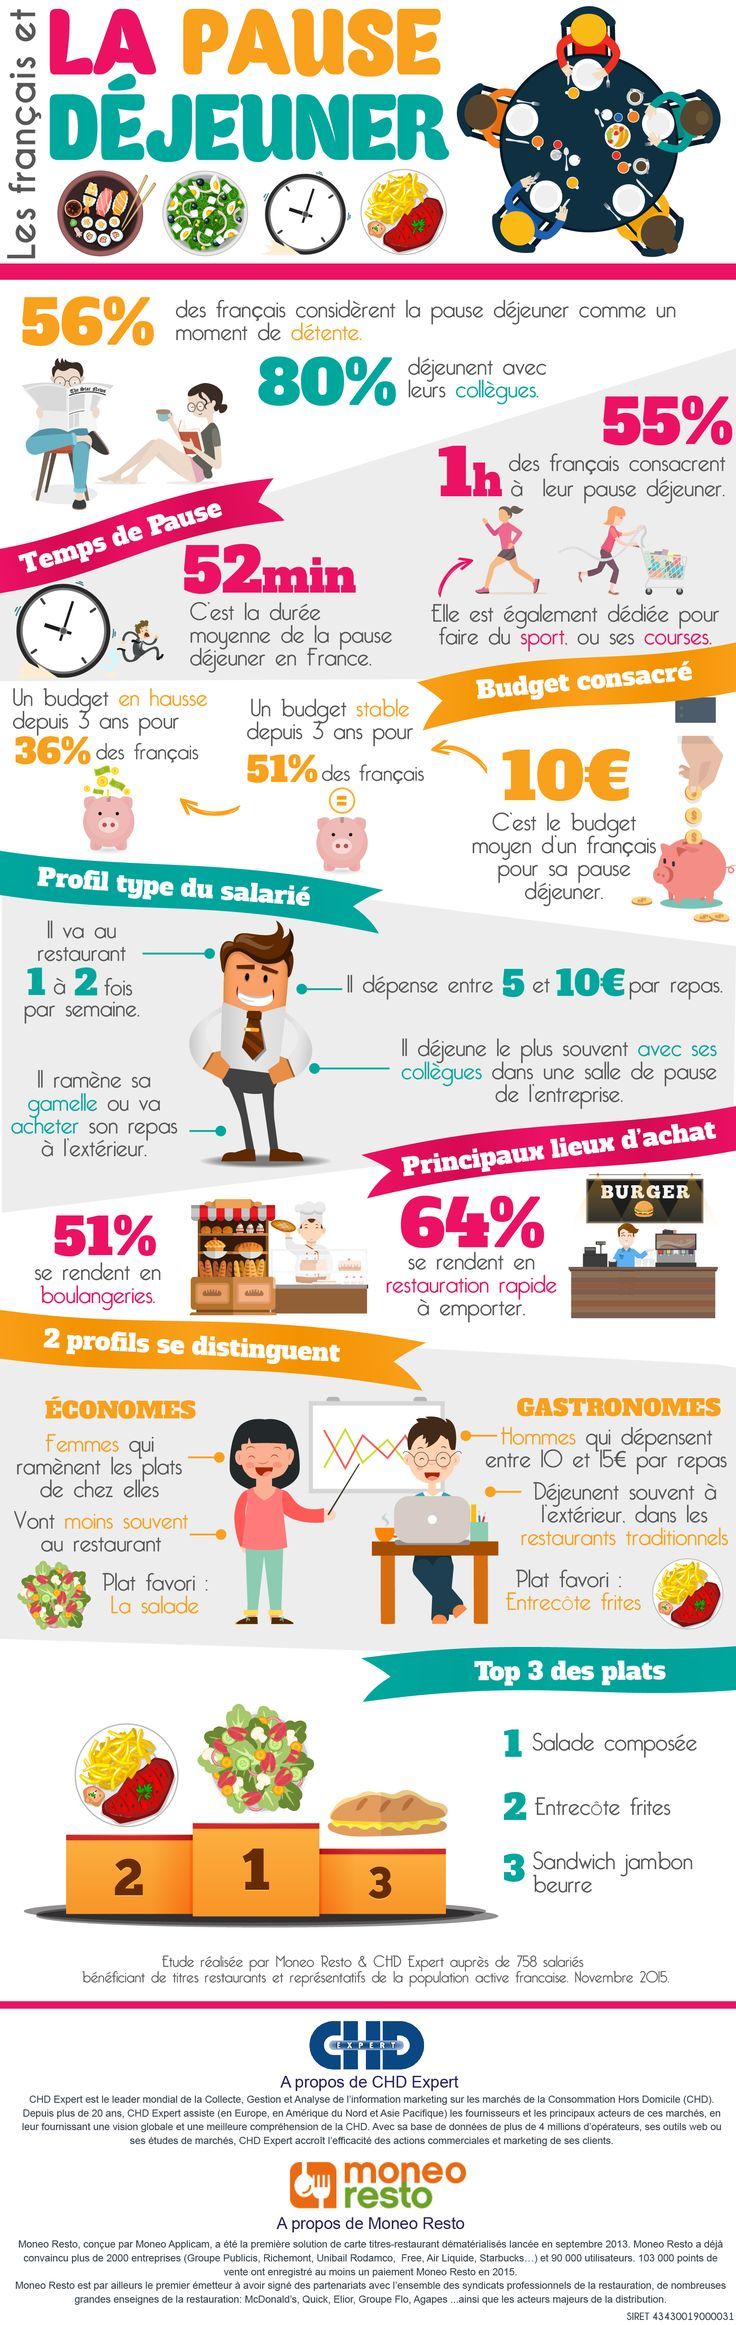 Educational Infographic Infographie Les Francais Et La Pause Dejeuner Chd Expert Infographicnow Com Your Number One Source For Daily Infographics Visual Creativity